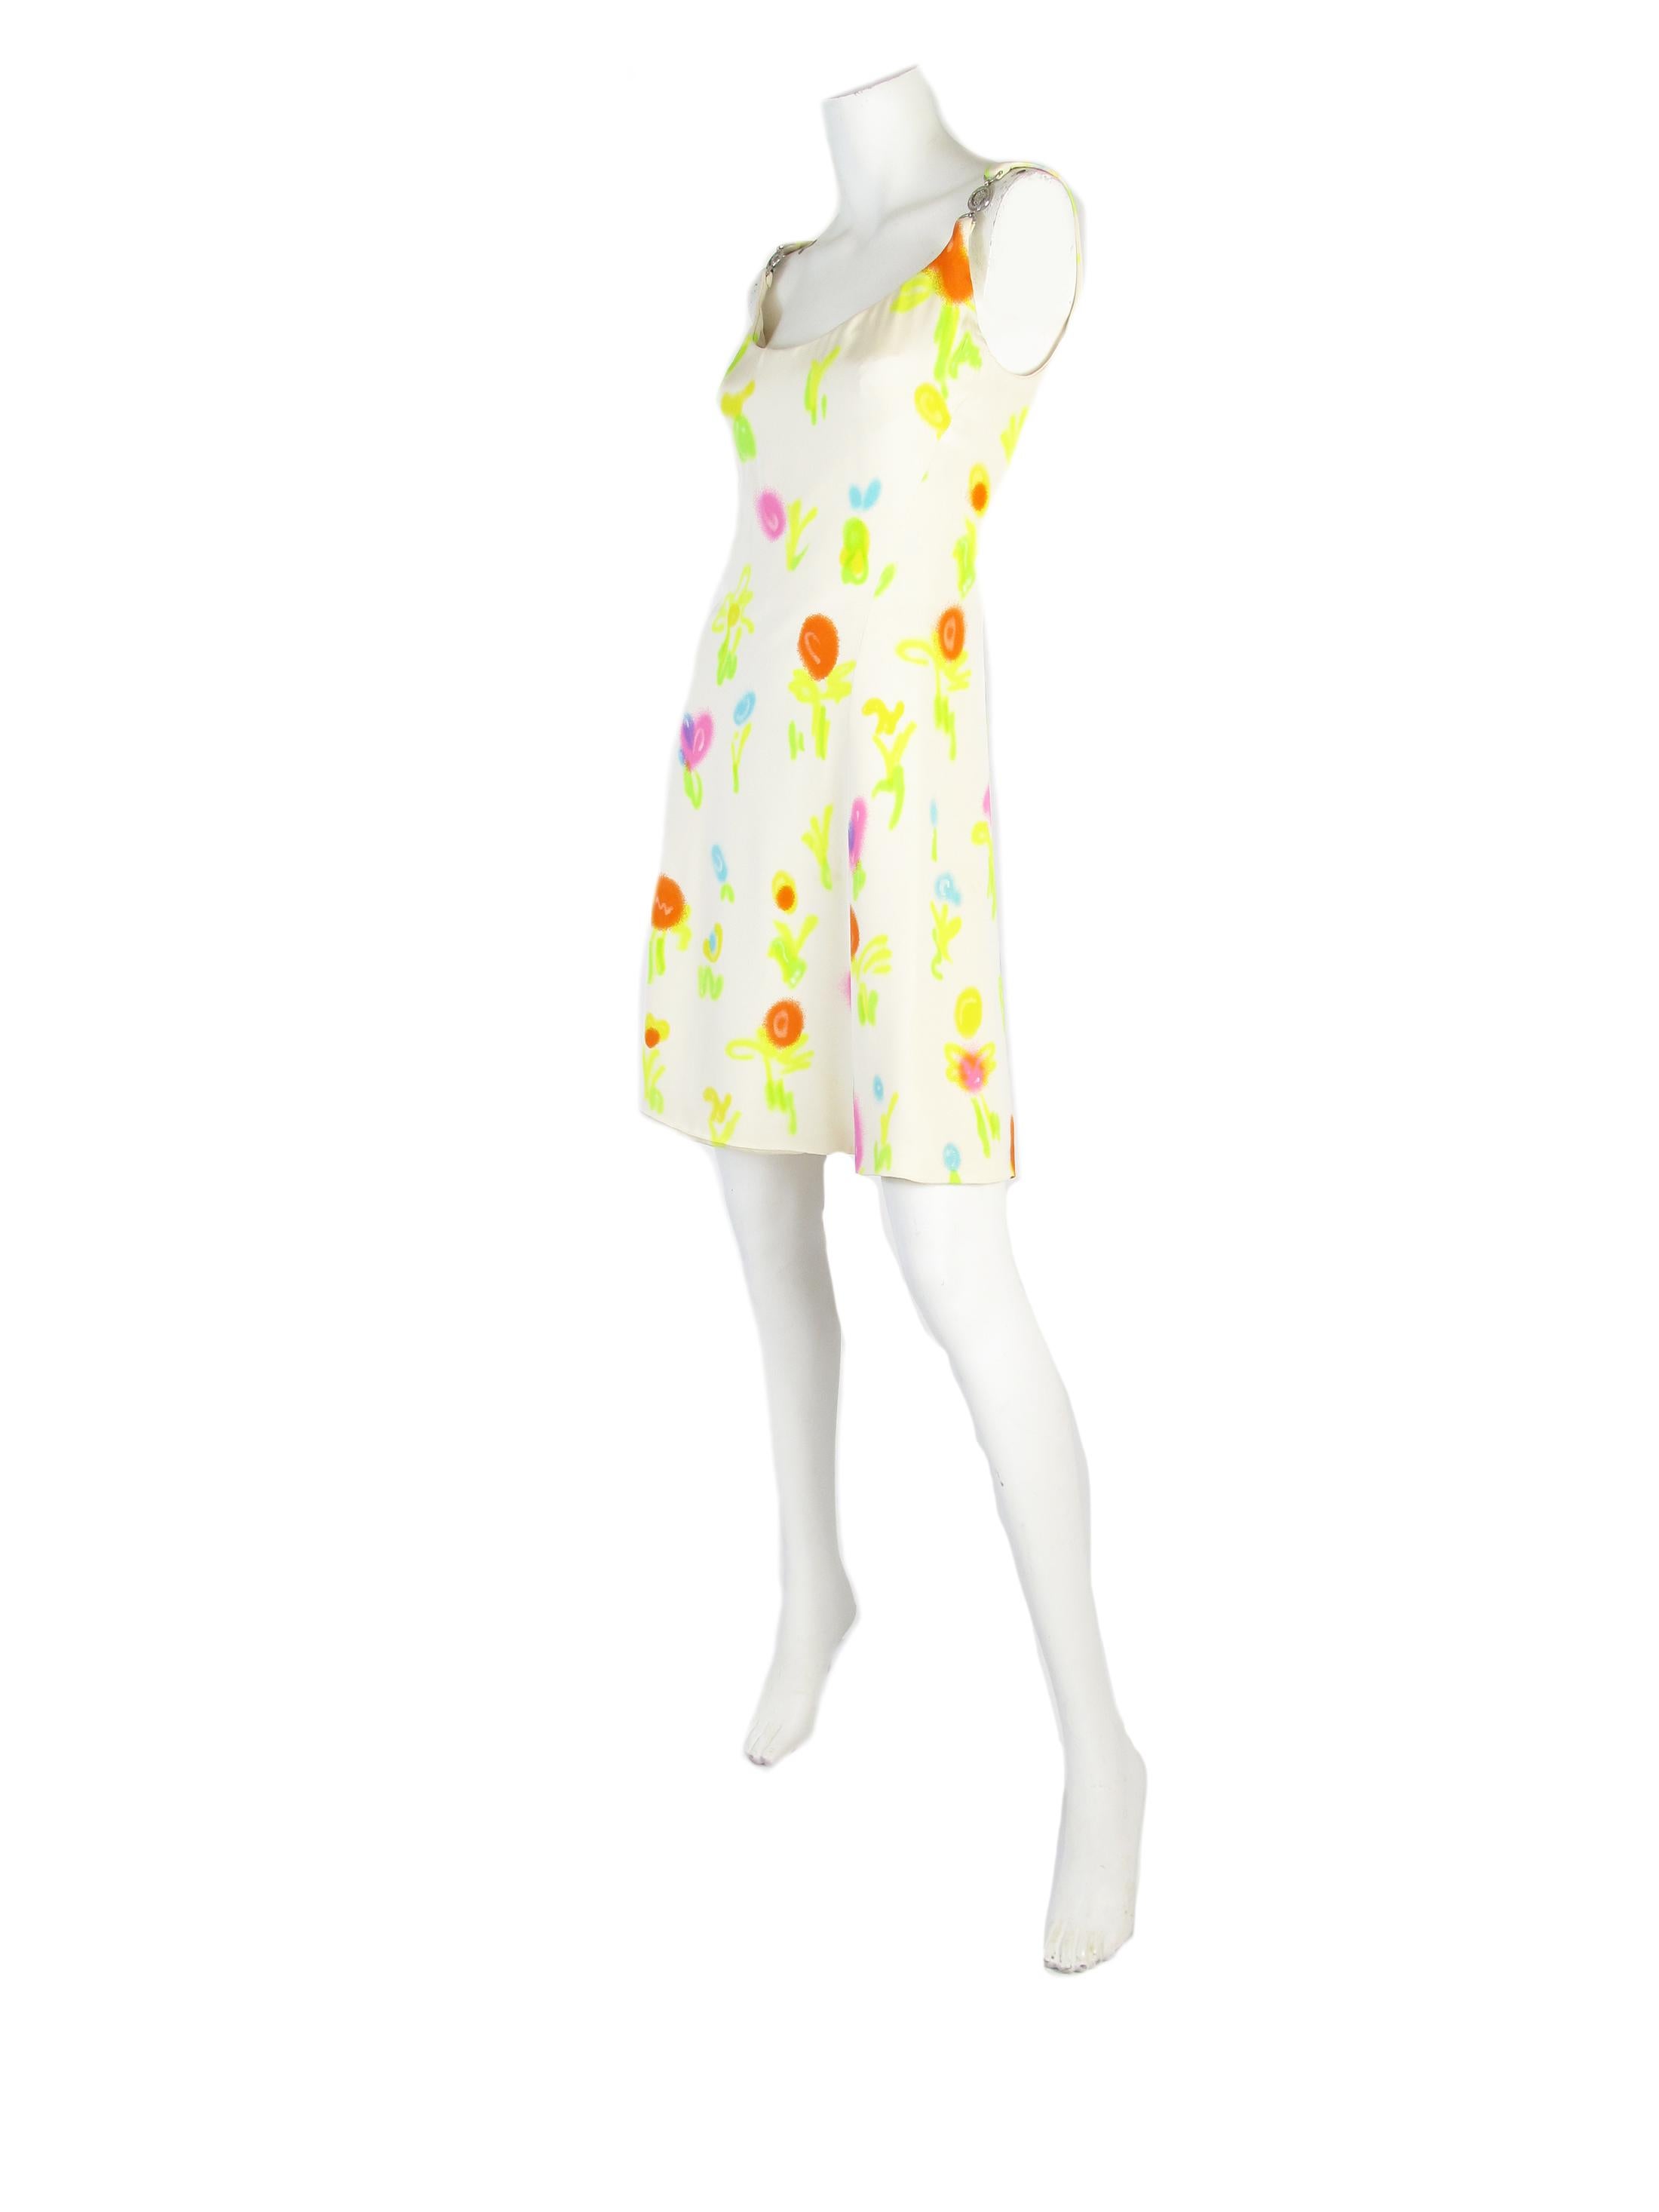 1996 Gianni Versace neon print silk mini dress. Condition: Very good. Size 40. Mannequin is a US 6.
